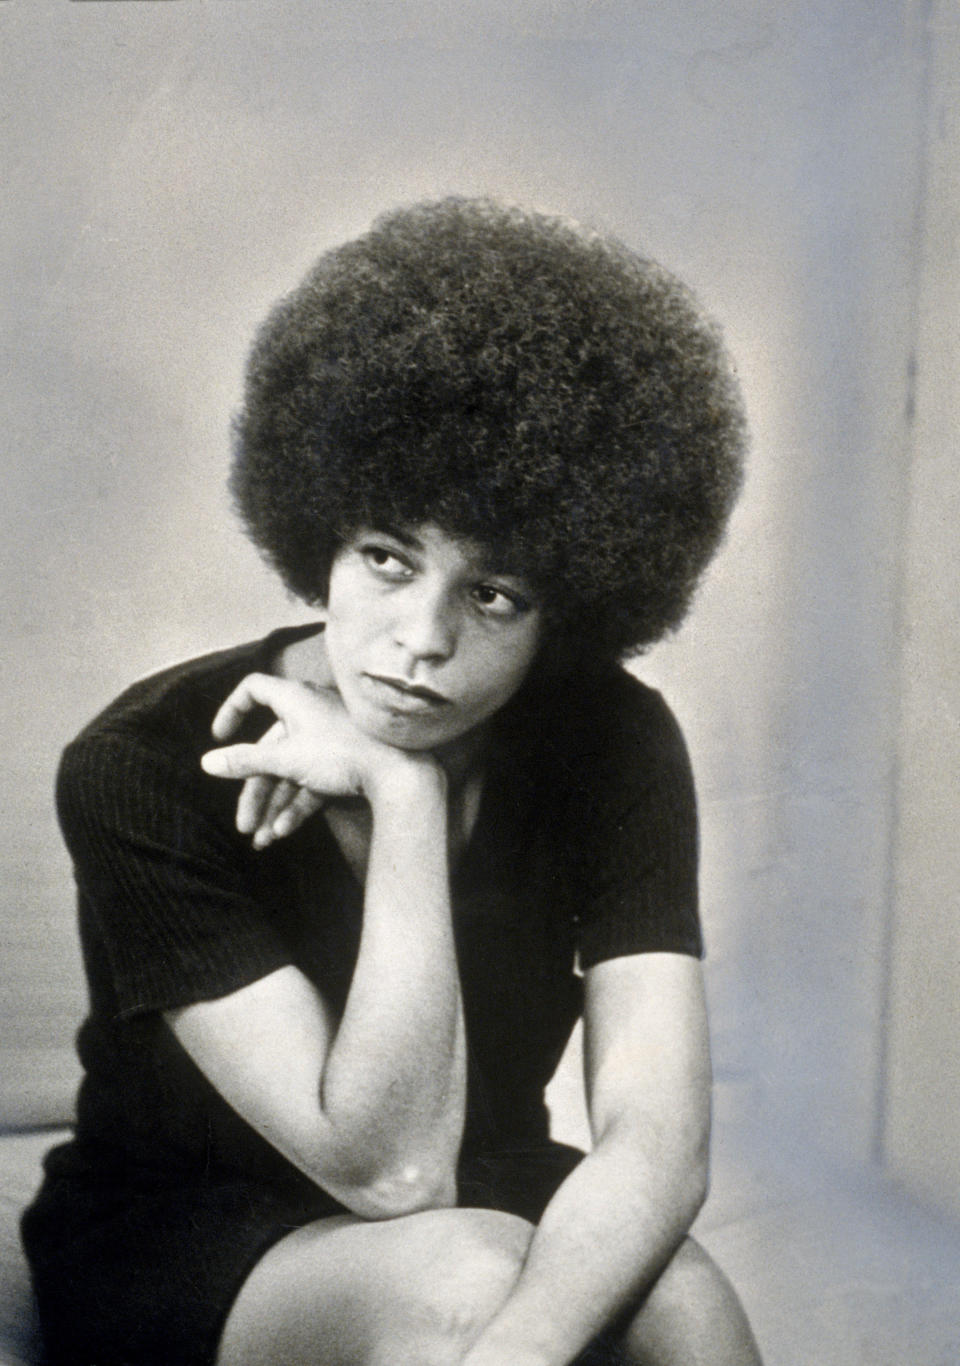 <a href="http://www.biography.com/people/angela-davis-9267589" target="_blank">Davis</a> is a revolutionary American educator. The former Black Panther has fought for race, class and gender equality over the years. Davis authored one of the of the most distinguished books in the field of women's studies called <i>Women, Race &amp; Class</i>. She's also an advocate of prison reform.